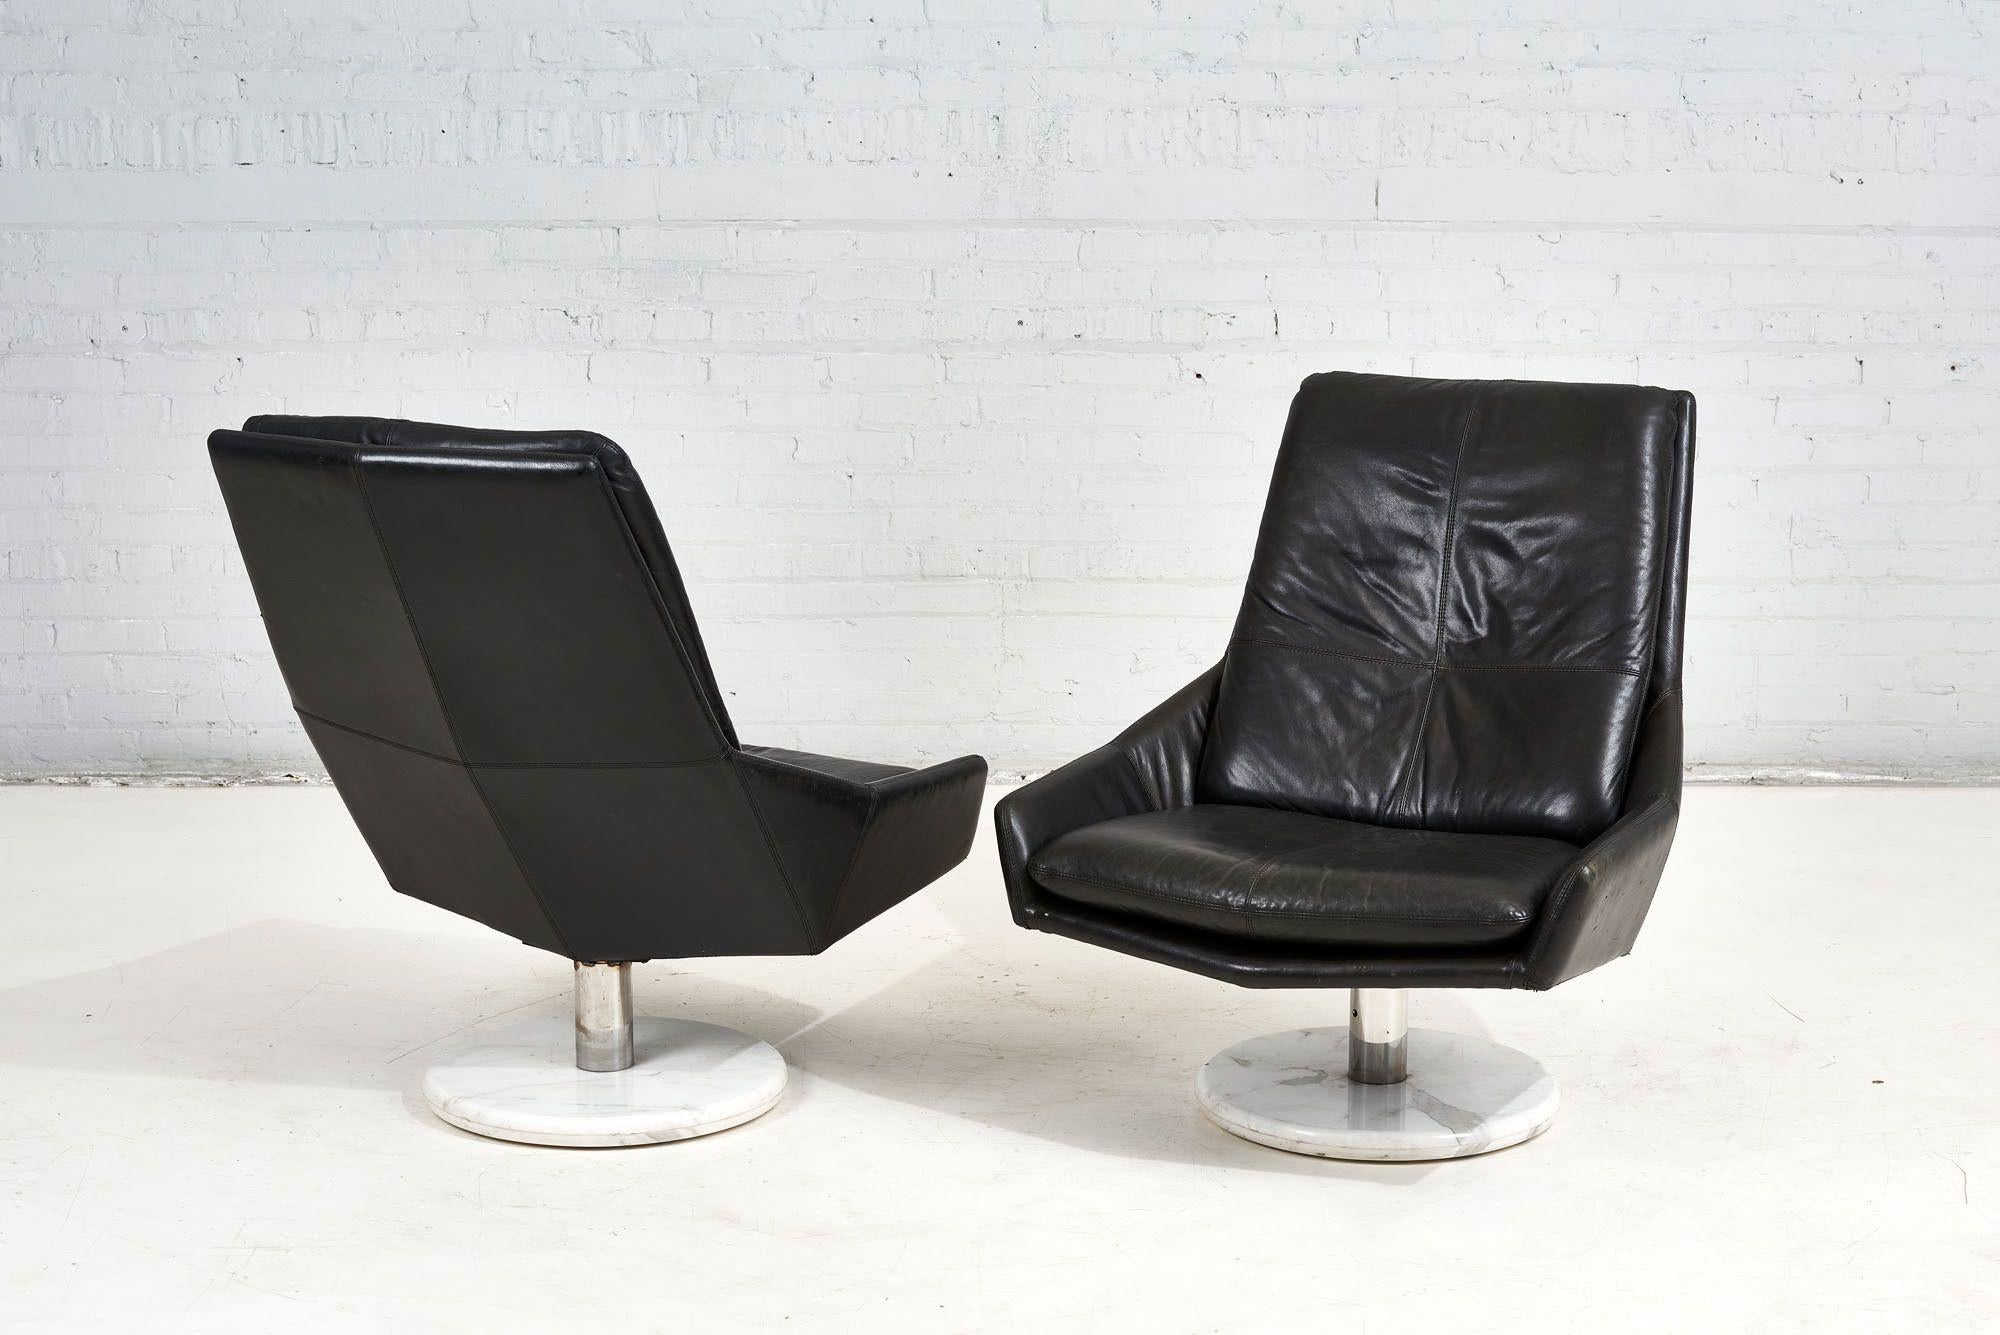 Black Leather Lounge Chairs with Calacutta Marble Bases, 1970 In Good Condition For Sale In Chicago, IL